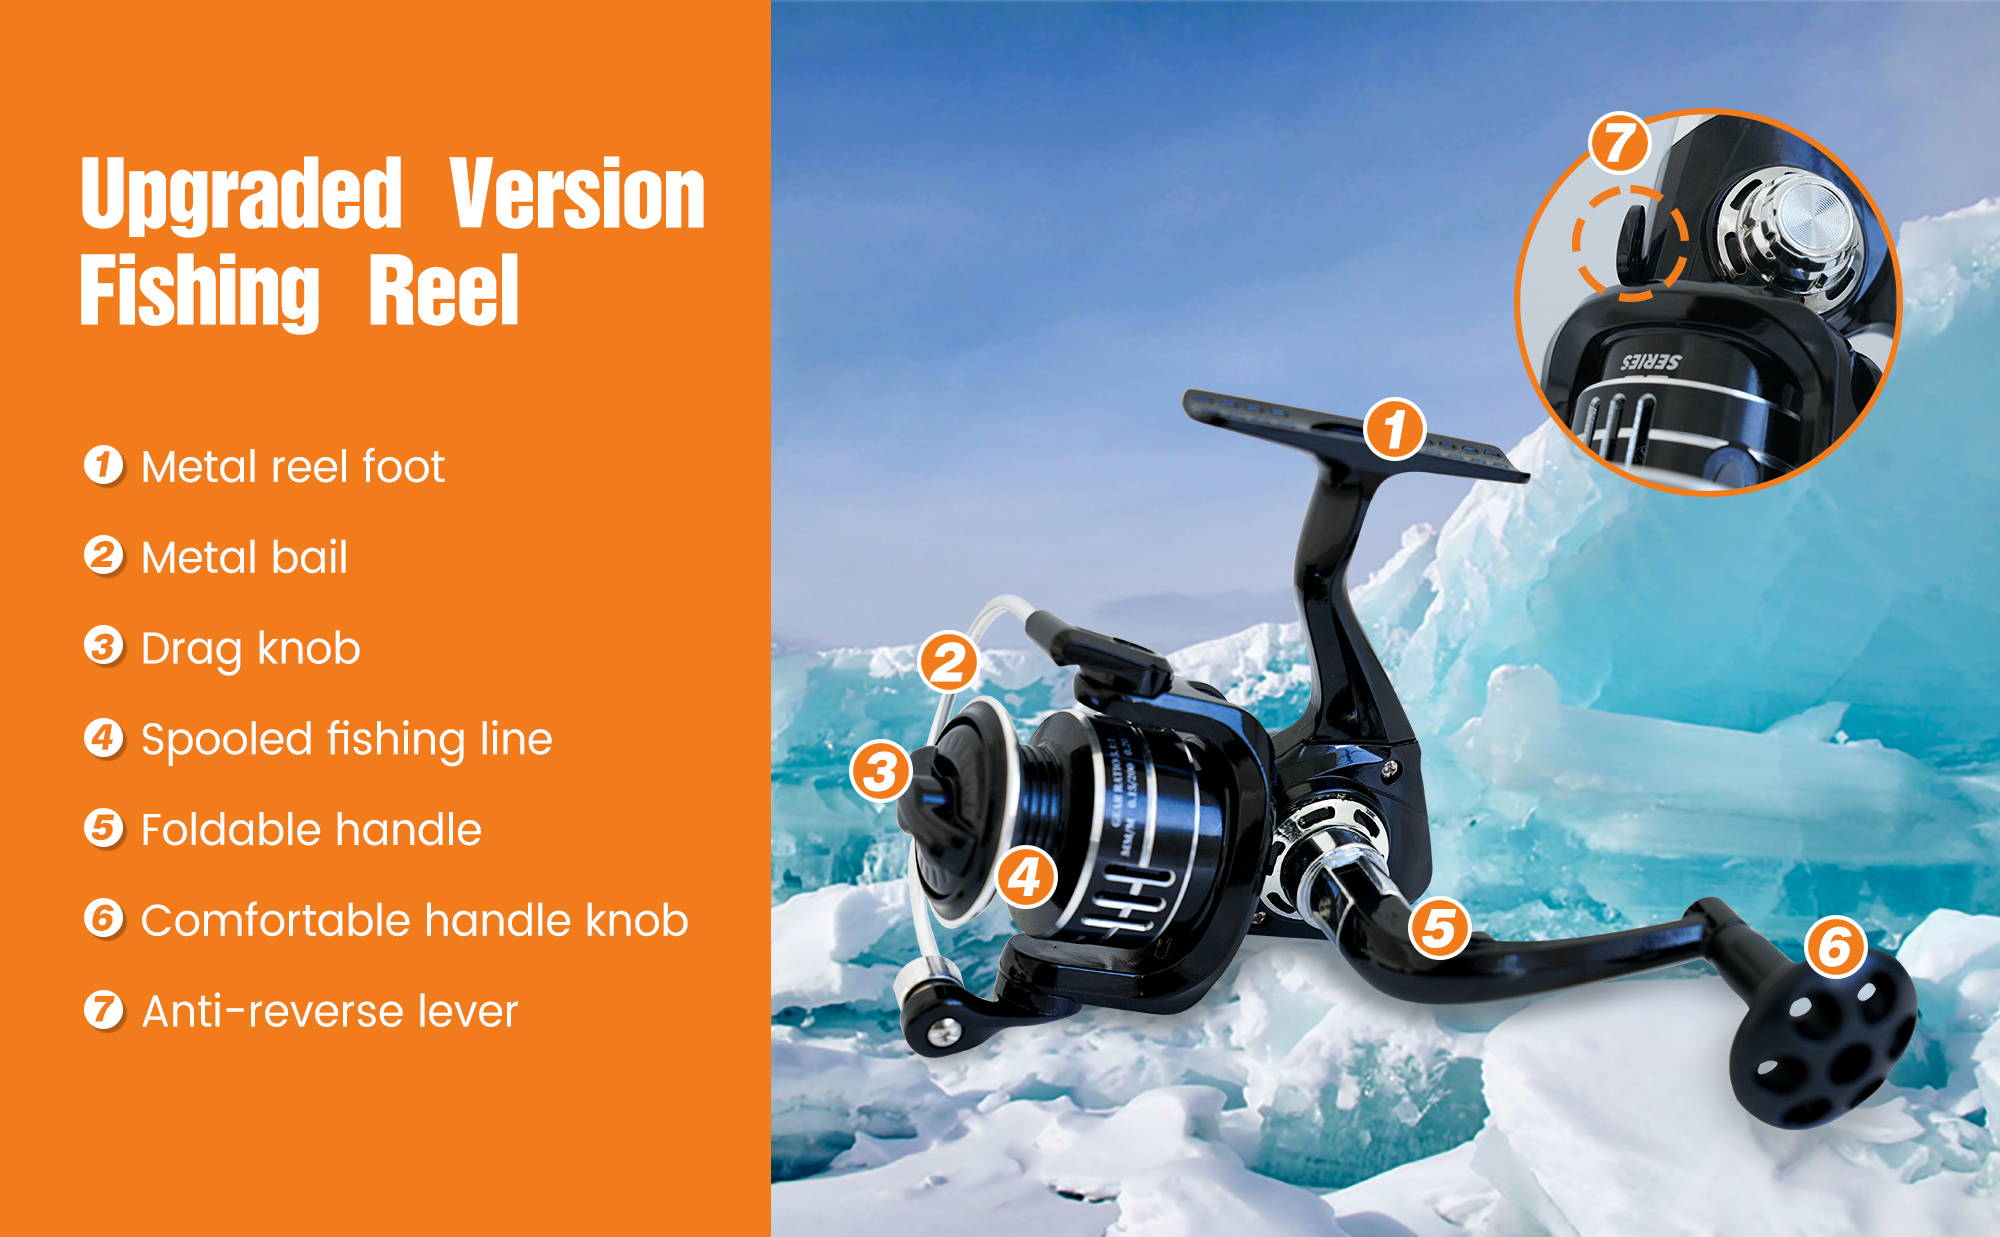 Key Features and Benefits of Tuxedo Sailor's intermediate ice fishing rod